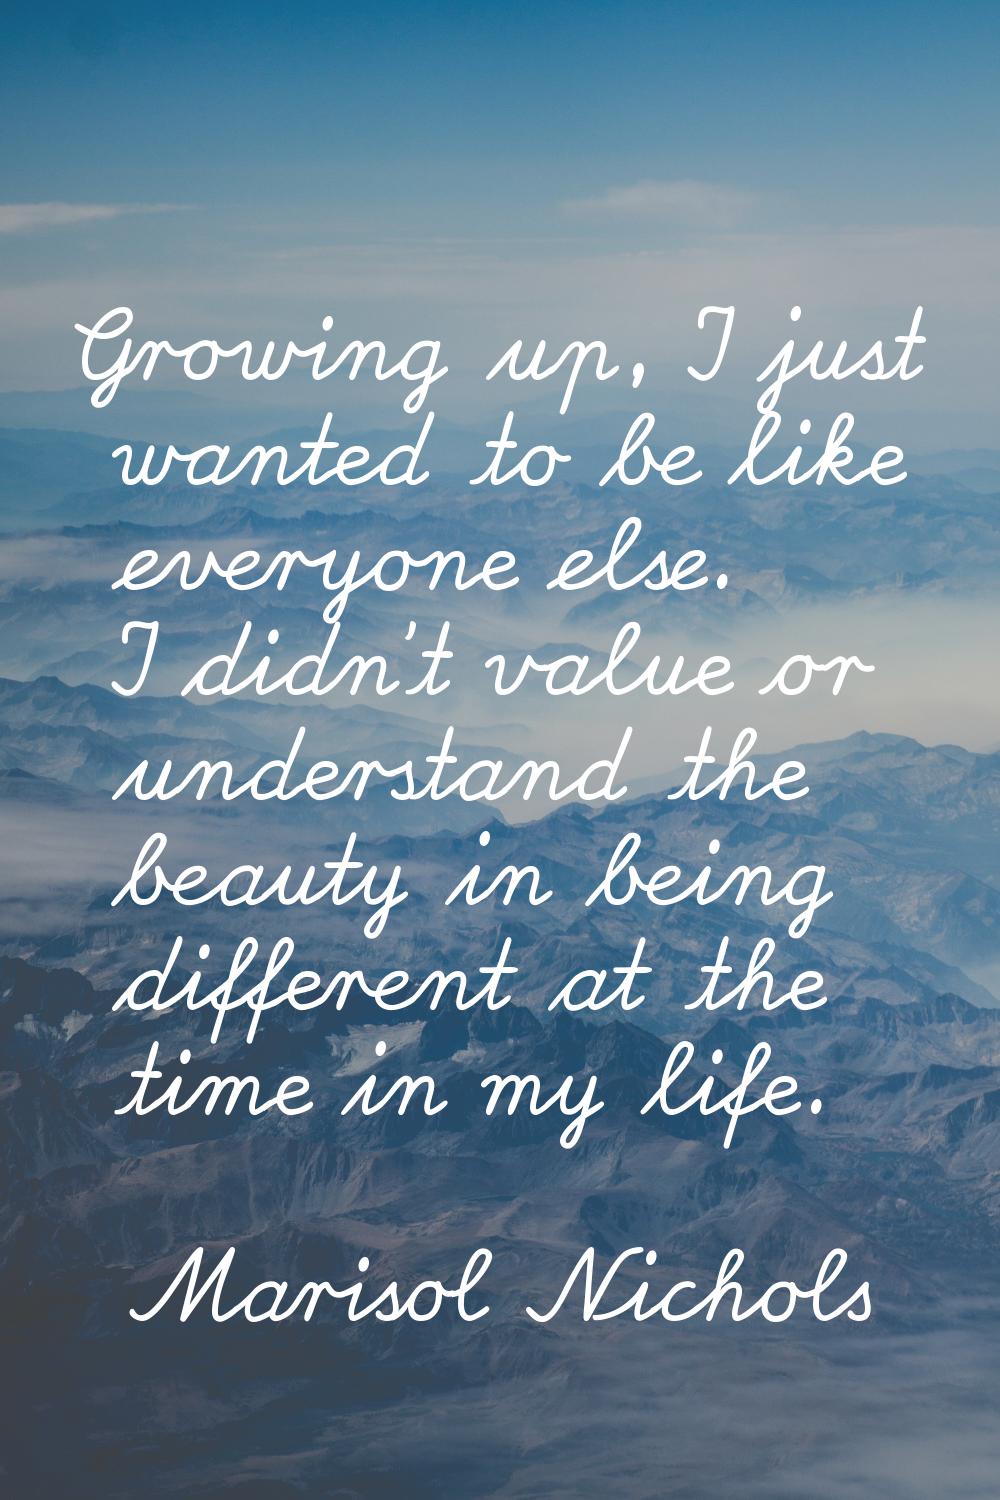 Growing up, I just wanted to be like everyone else. I didn't value or understand the beauty in bein